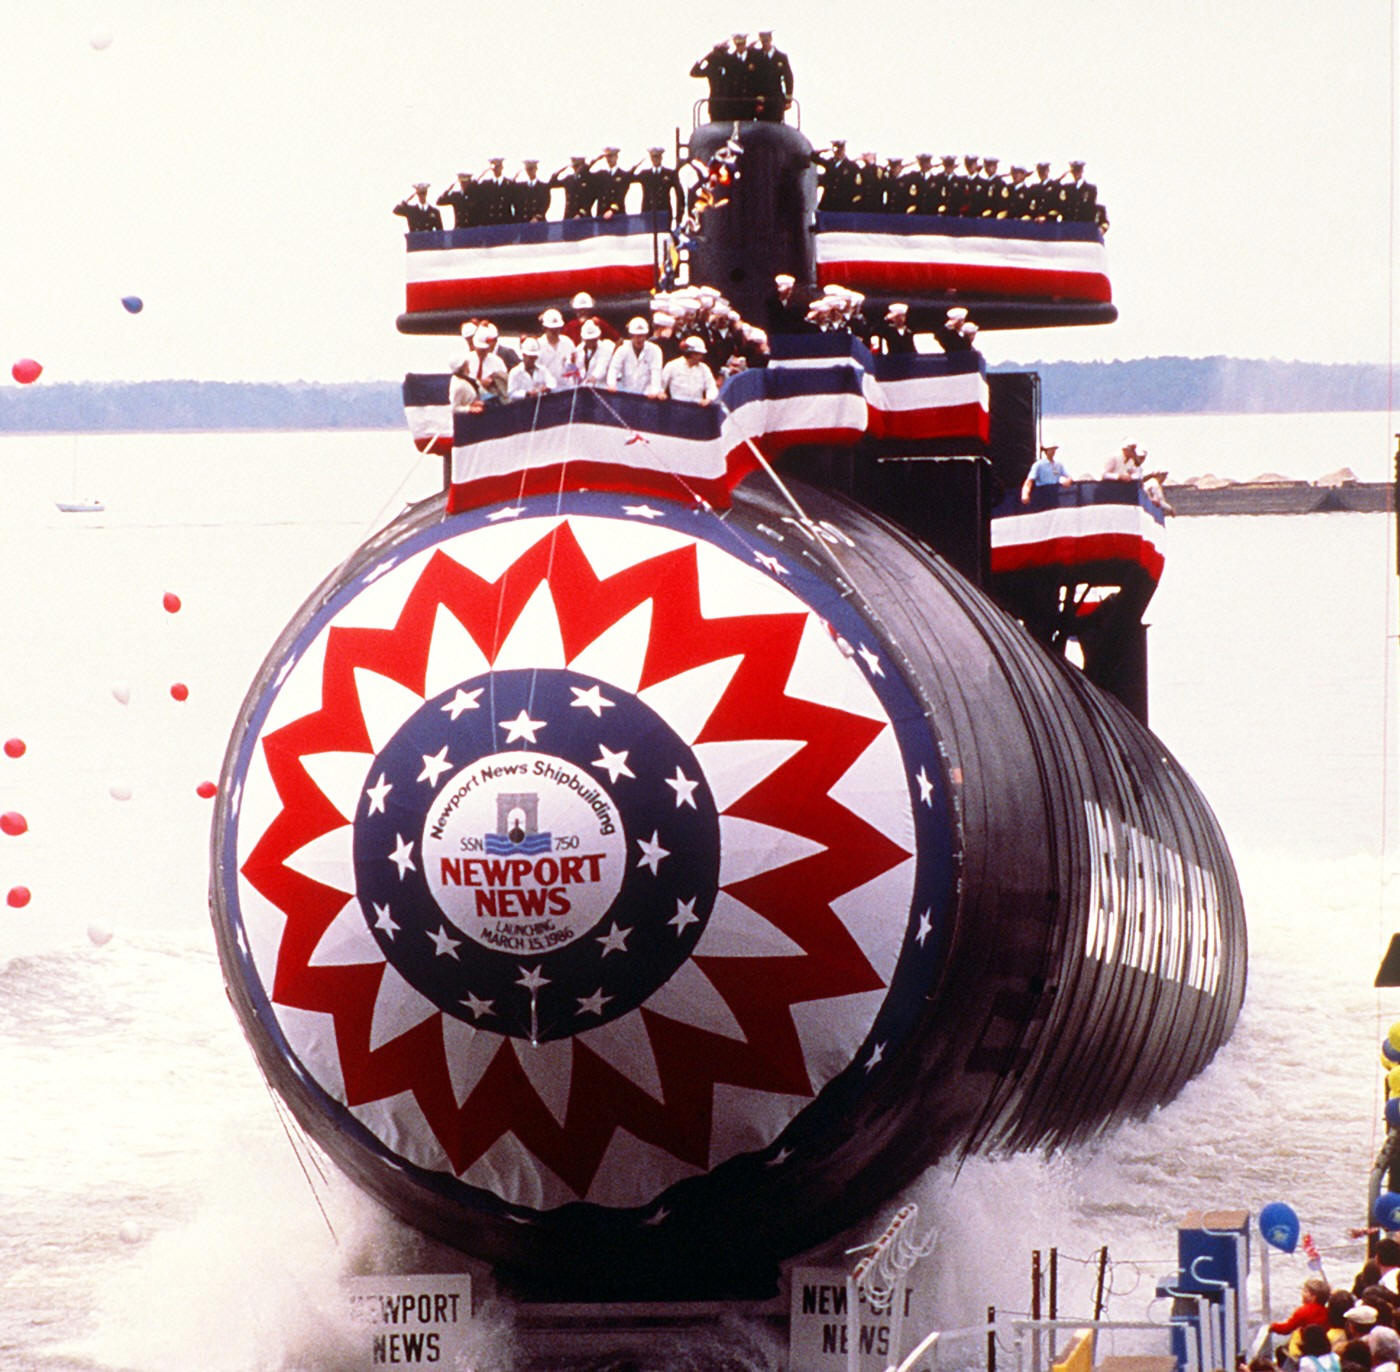 ssn-750 uss newport news launching ceremony march 1986